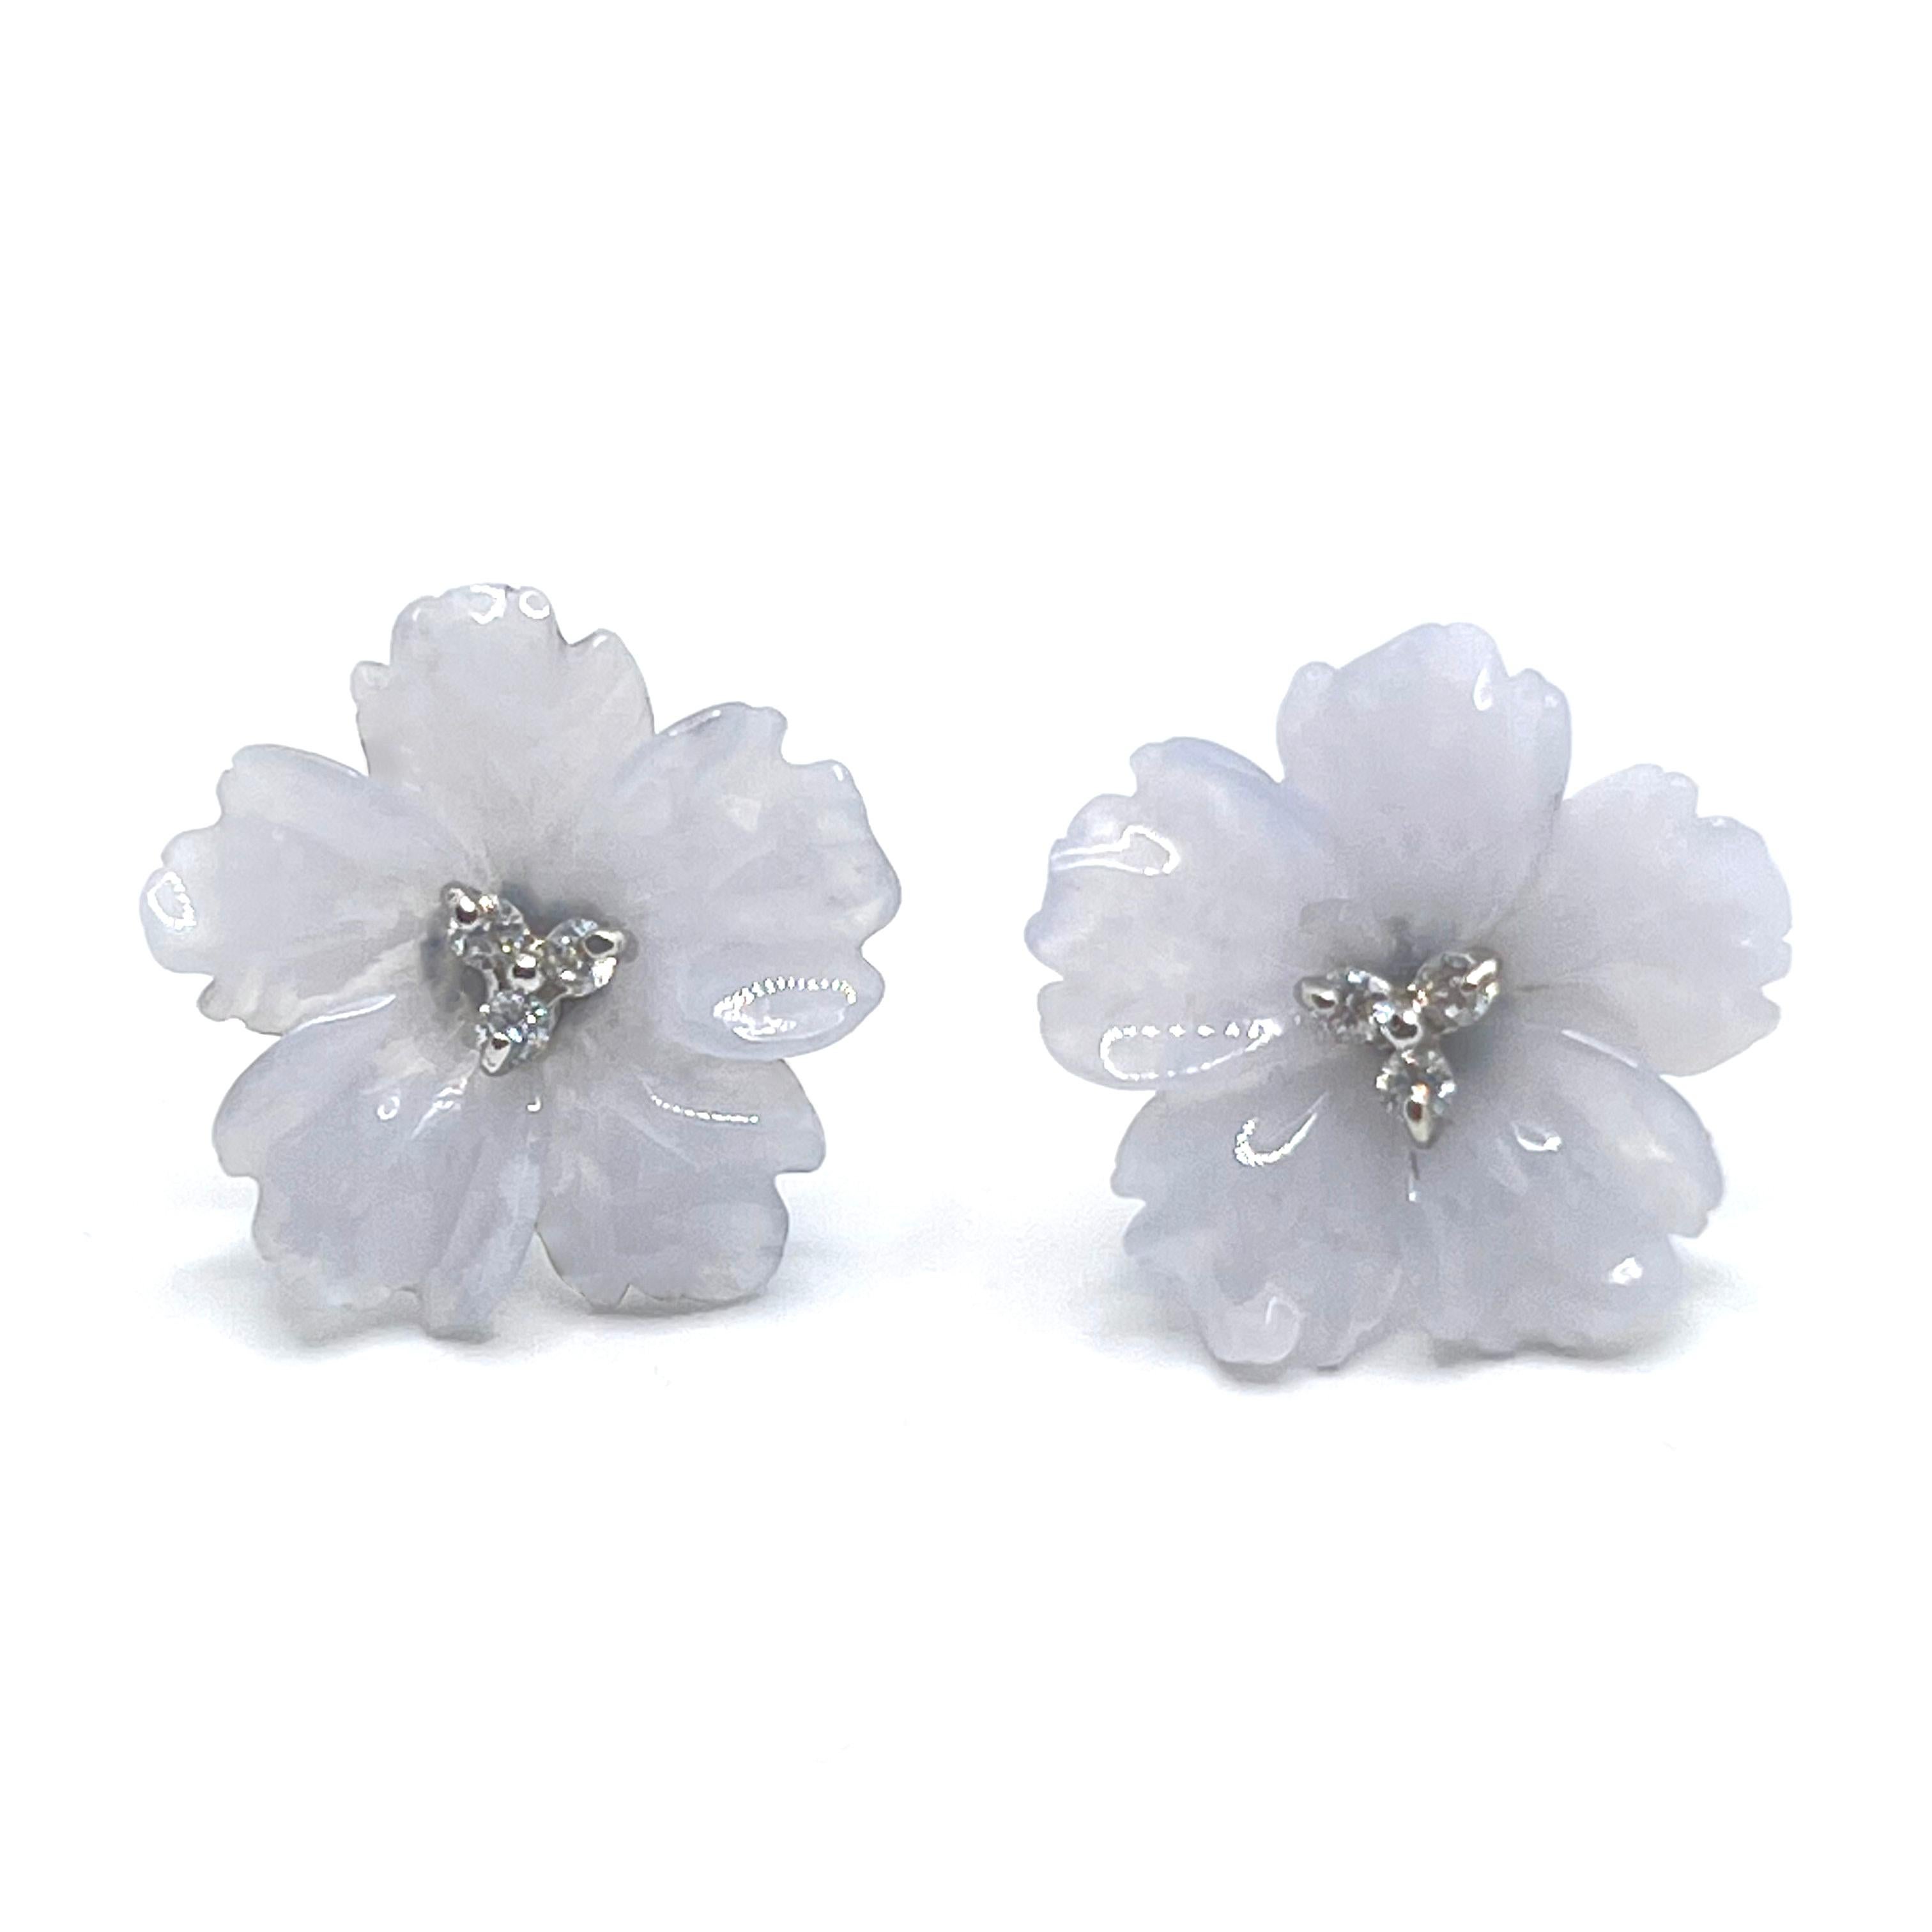 Elegant 18mm Carved Chalcedony Flower Earrings

This gorgeous pair of earrings features 18mm periwinkle blue chalcedony carved into beautiful 3D flower, adorned with round simulated diamonds in the center, handset in platinum rhodium plated sterling